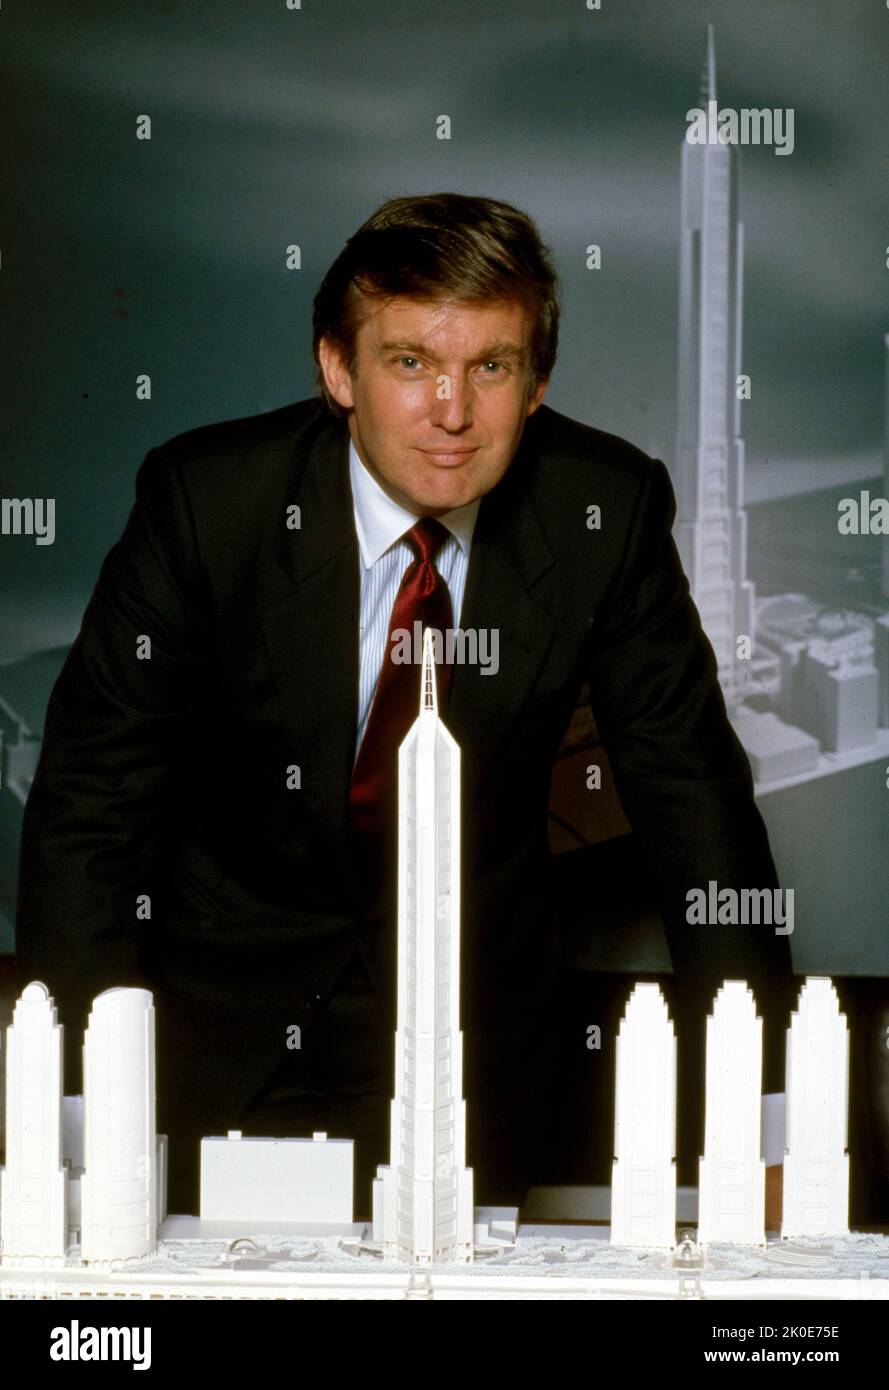 Photograph dated 1982 of Donald John Trump (born 1946), American politician, media personality, and businessman who served as the 45th president of the United States from 2017 to 2021. He became the president of his father Fred Trump's real estate business in 1971 and renamed it The Trump Organization. Trump expanded the company's operations to building and renovating skyscrapers, hotels, casinos, and golf courses. Stock Photo